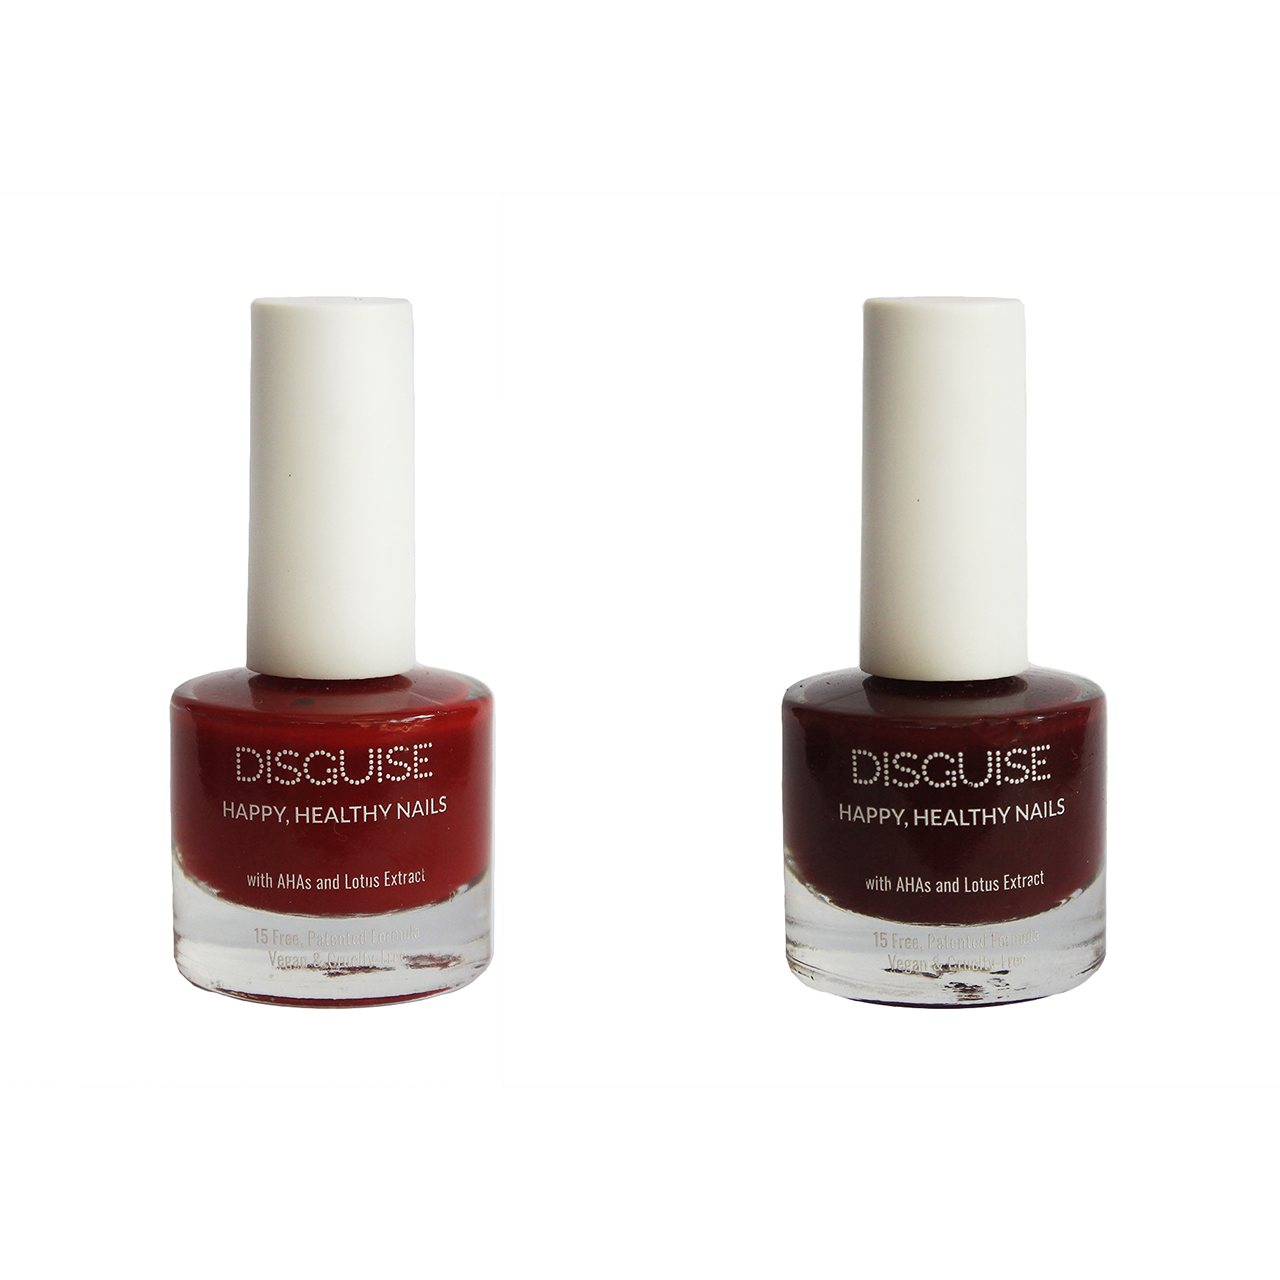 Ladybug Red 102 + Mulberry 101 - Nail Colour, 21 TOXIN FREE | WITH AHA & LOTUS EXTRACT | INTENSE COLOR | 9 ml